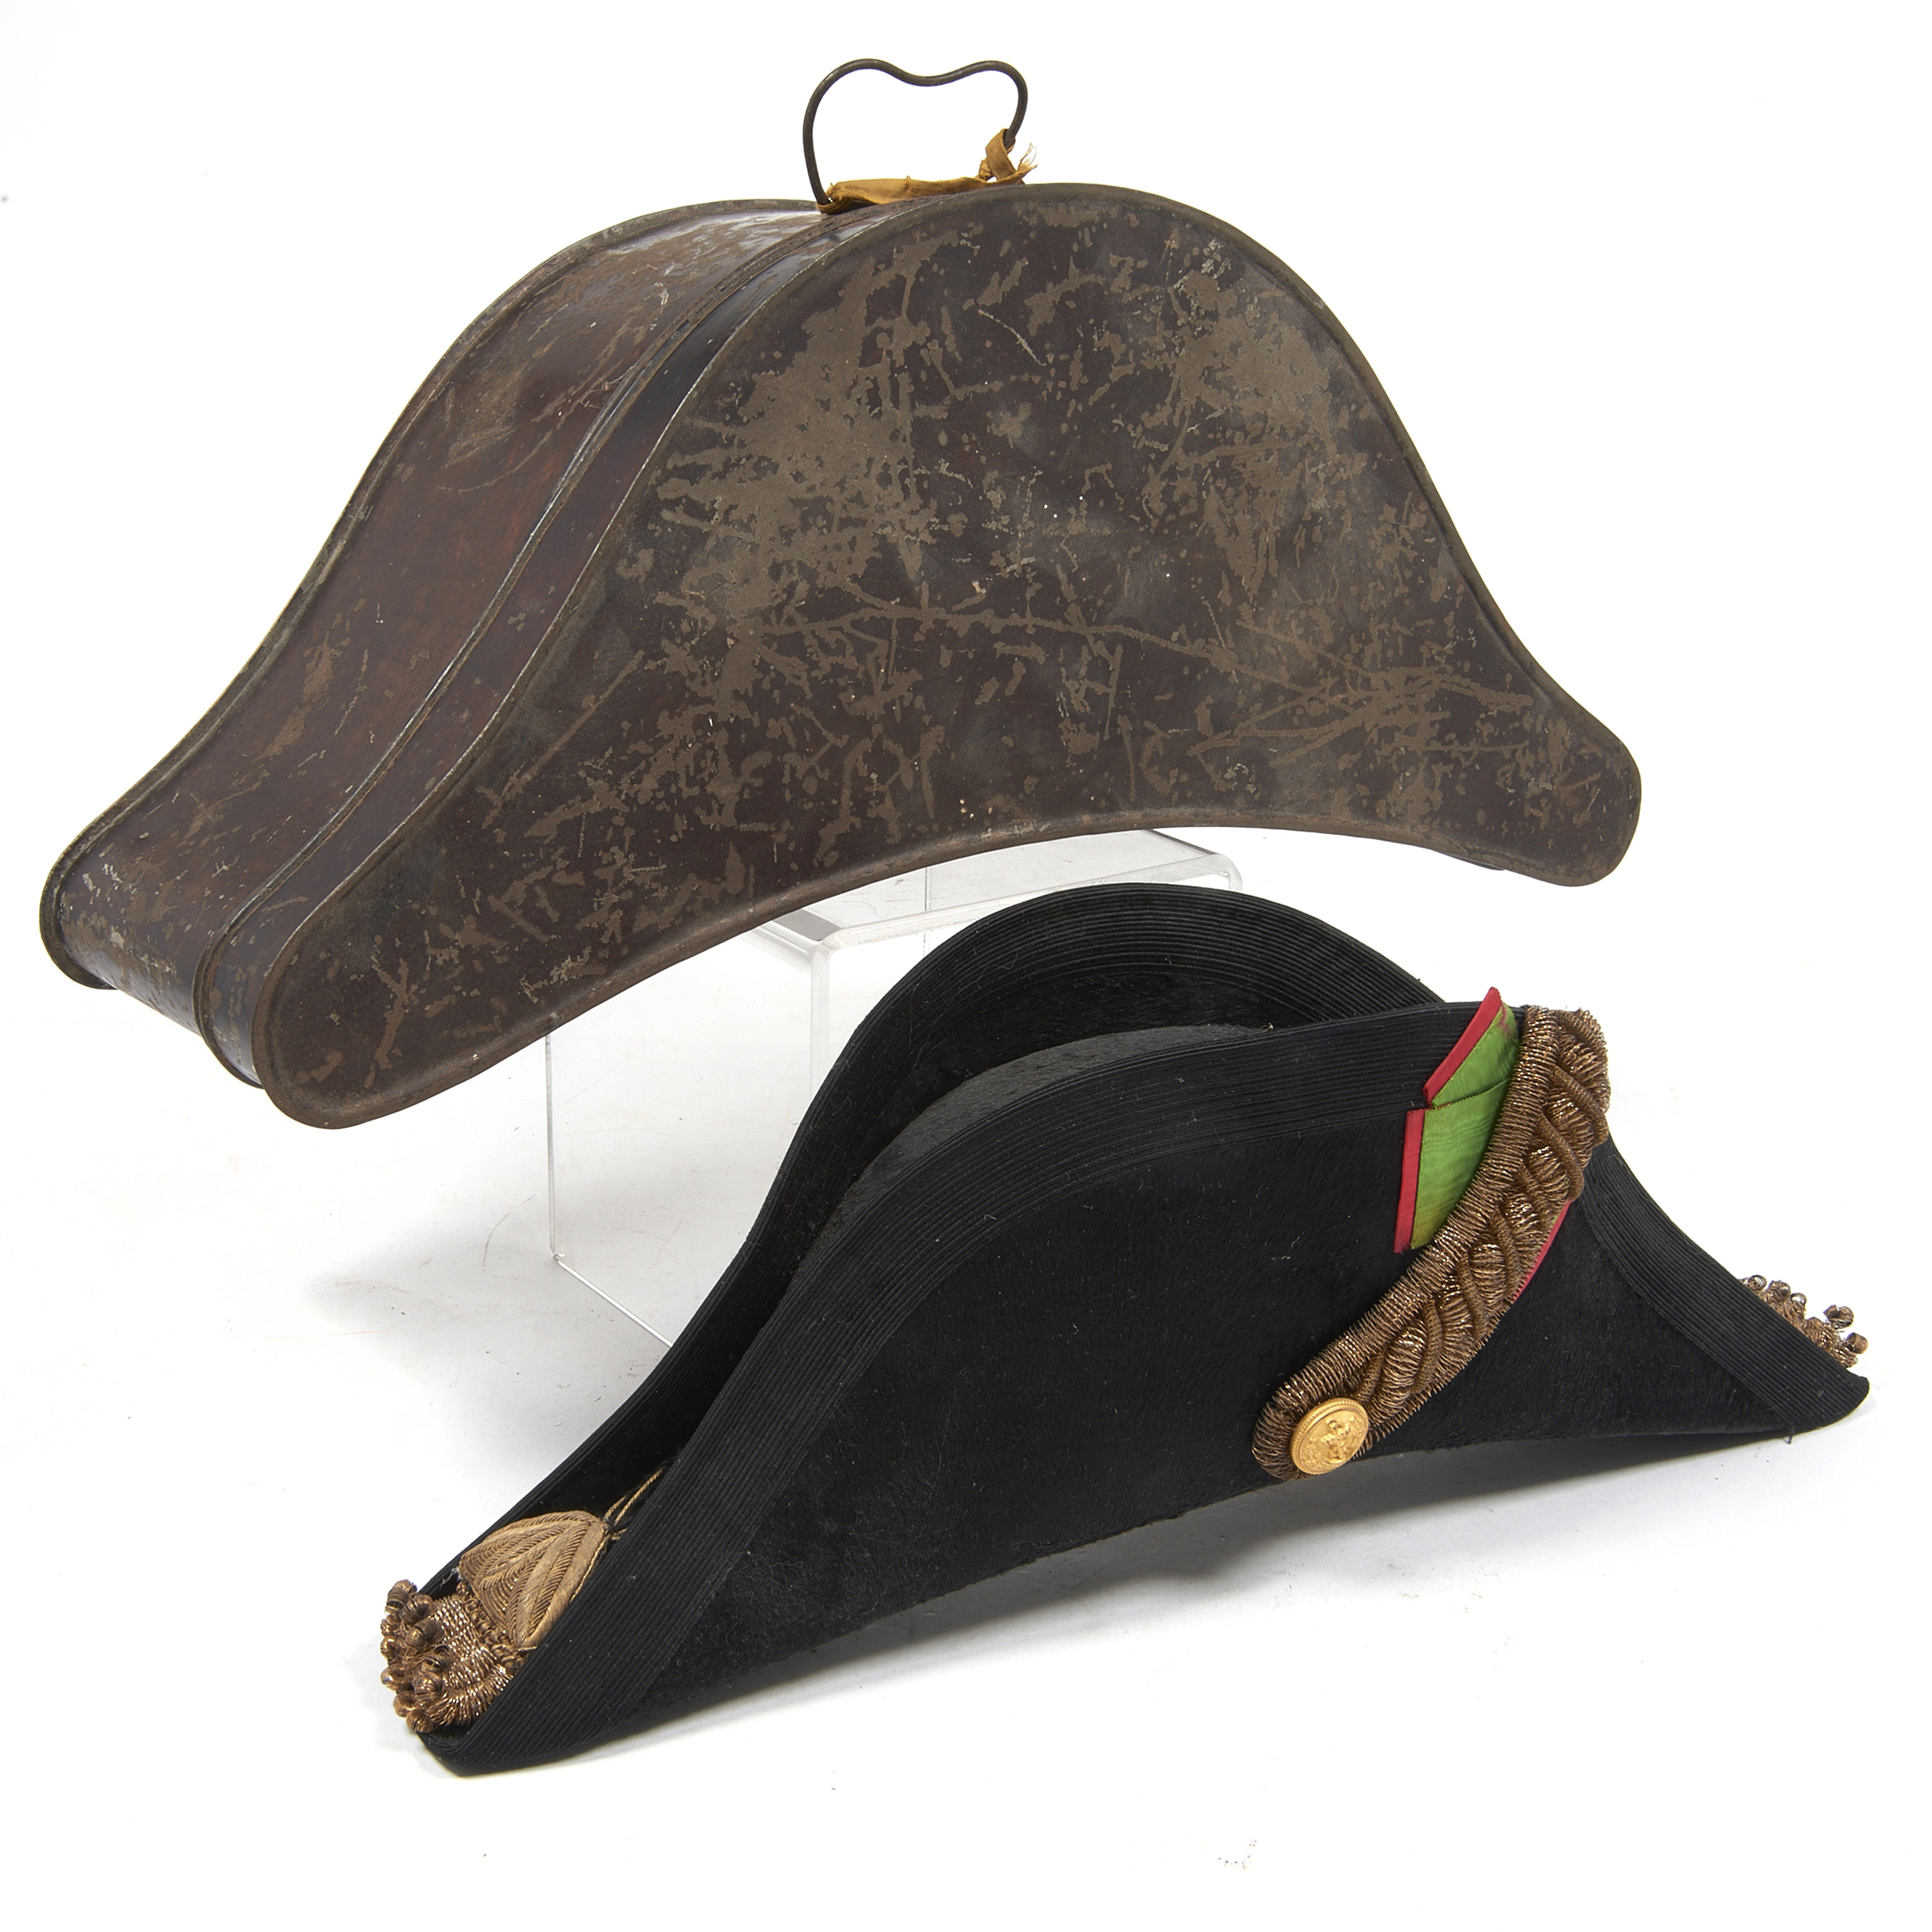 A PORTUGUESE NAVAL OFFICER BICORN HAT